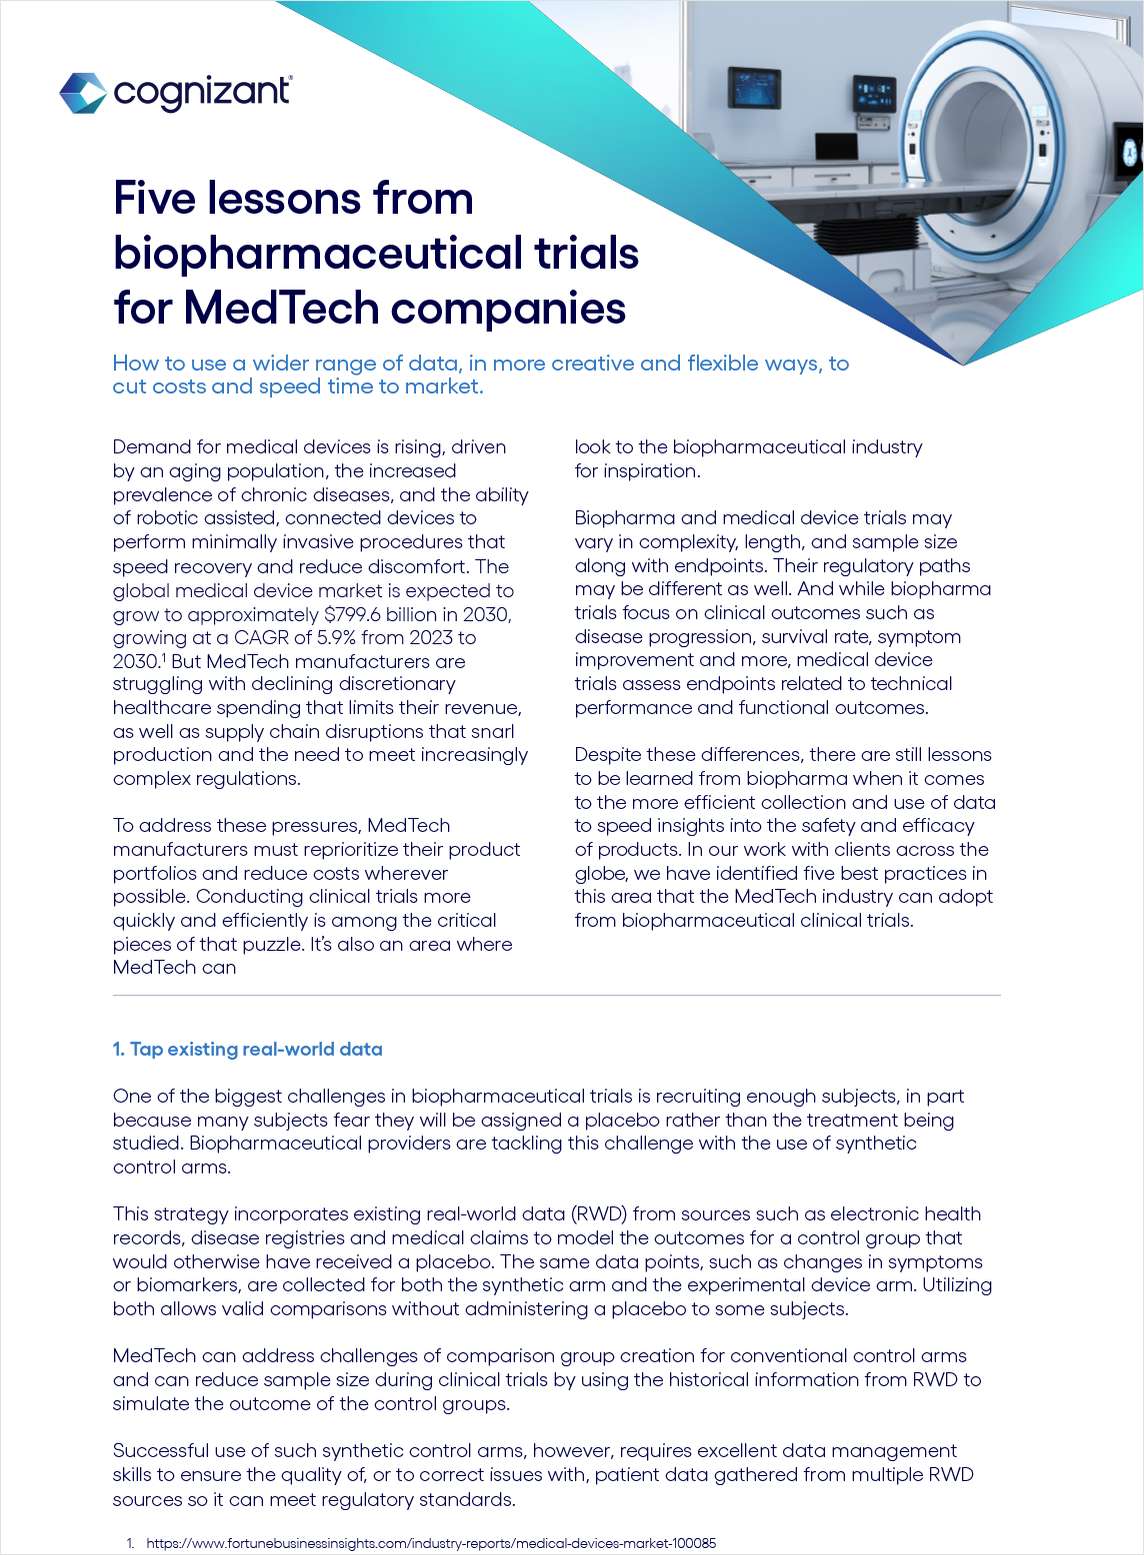 Five Lessons from Biopharmaceutical Trials for MedTech Companies